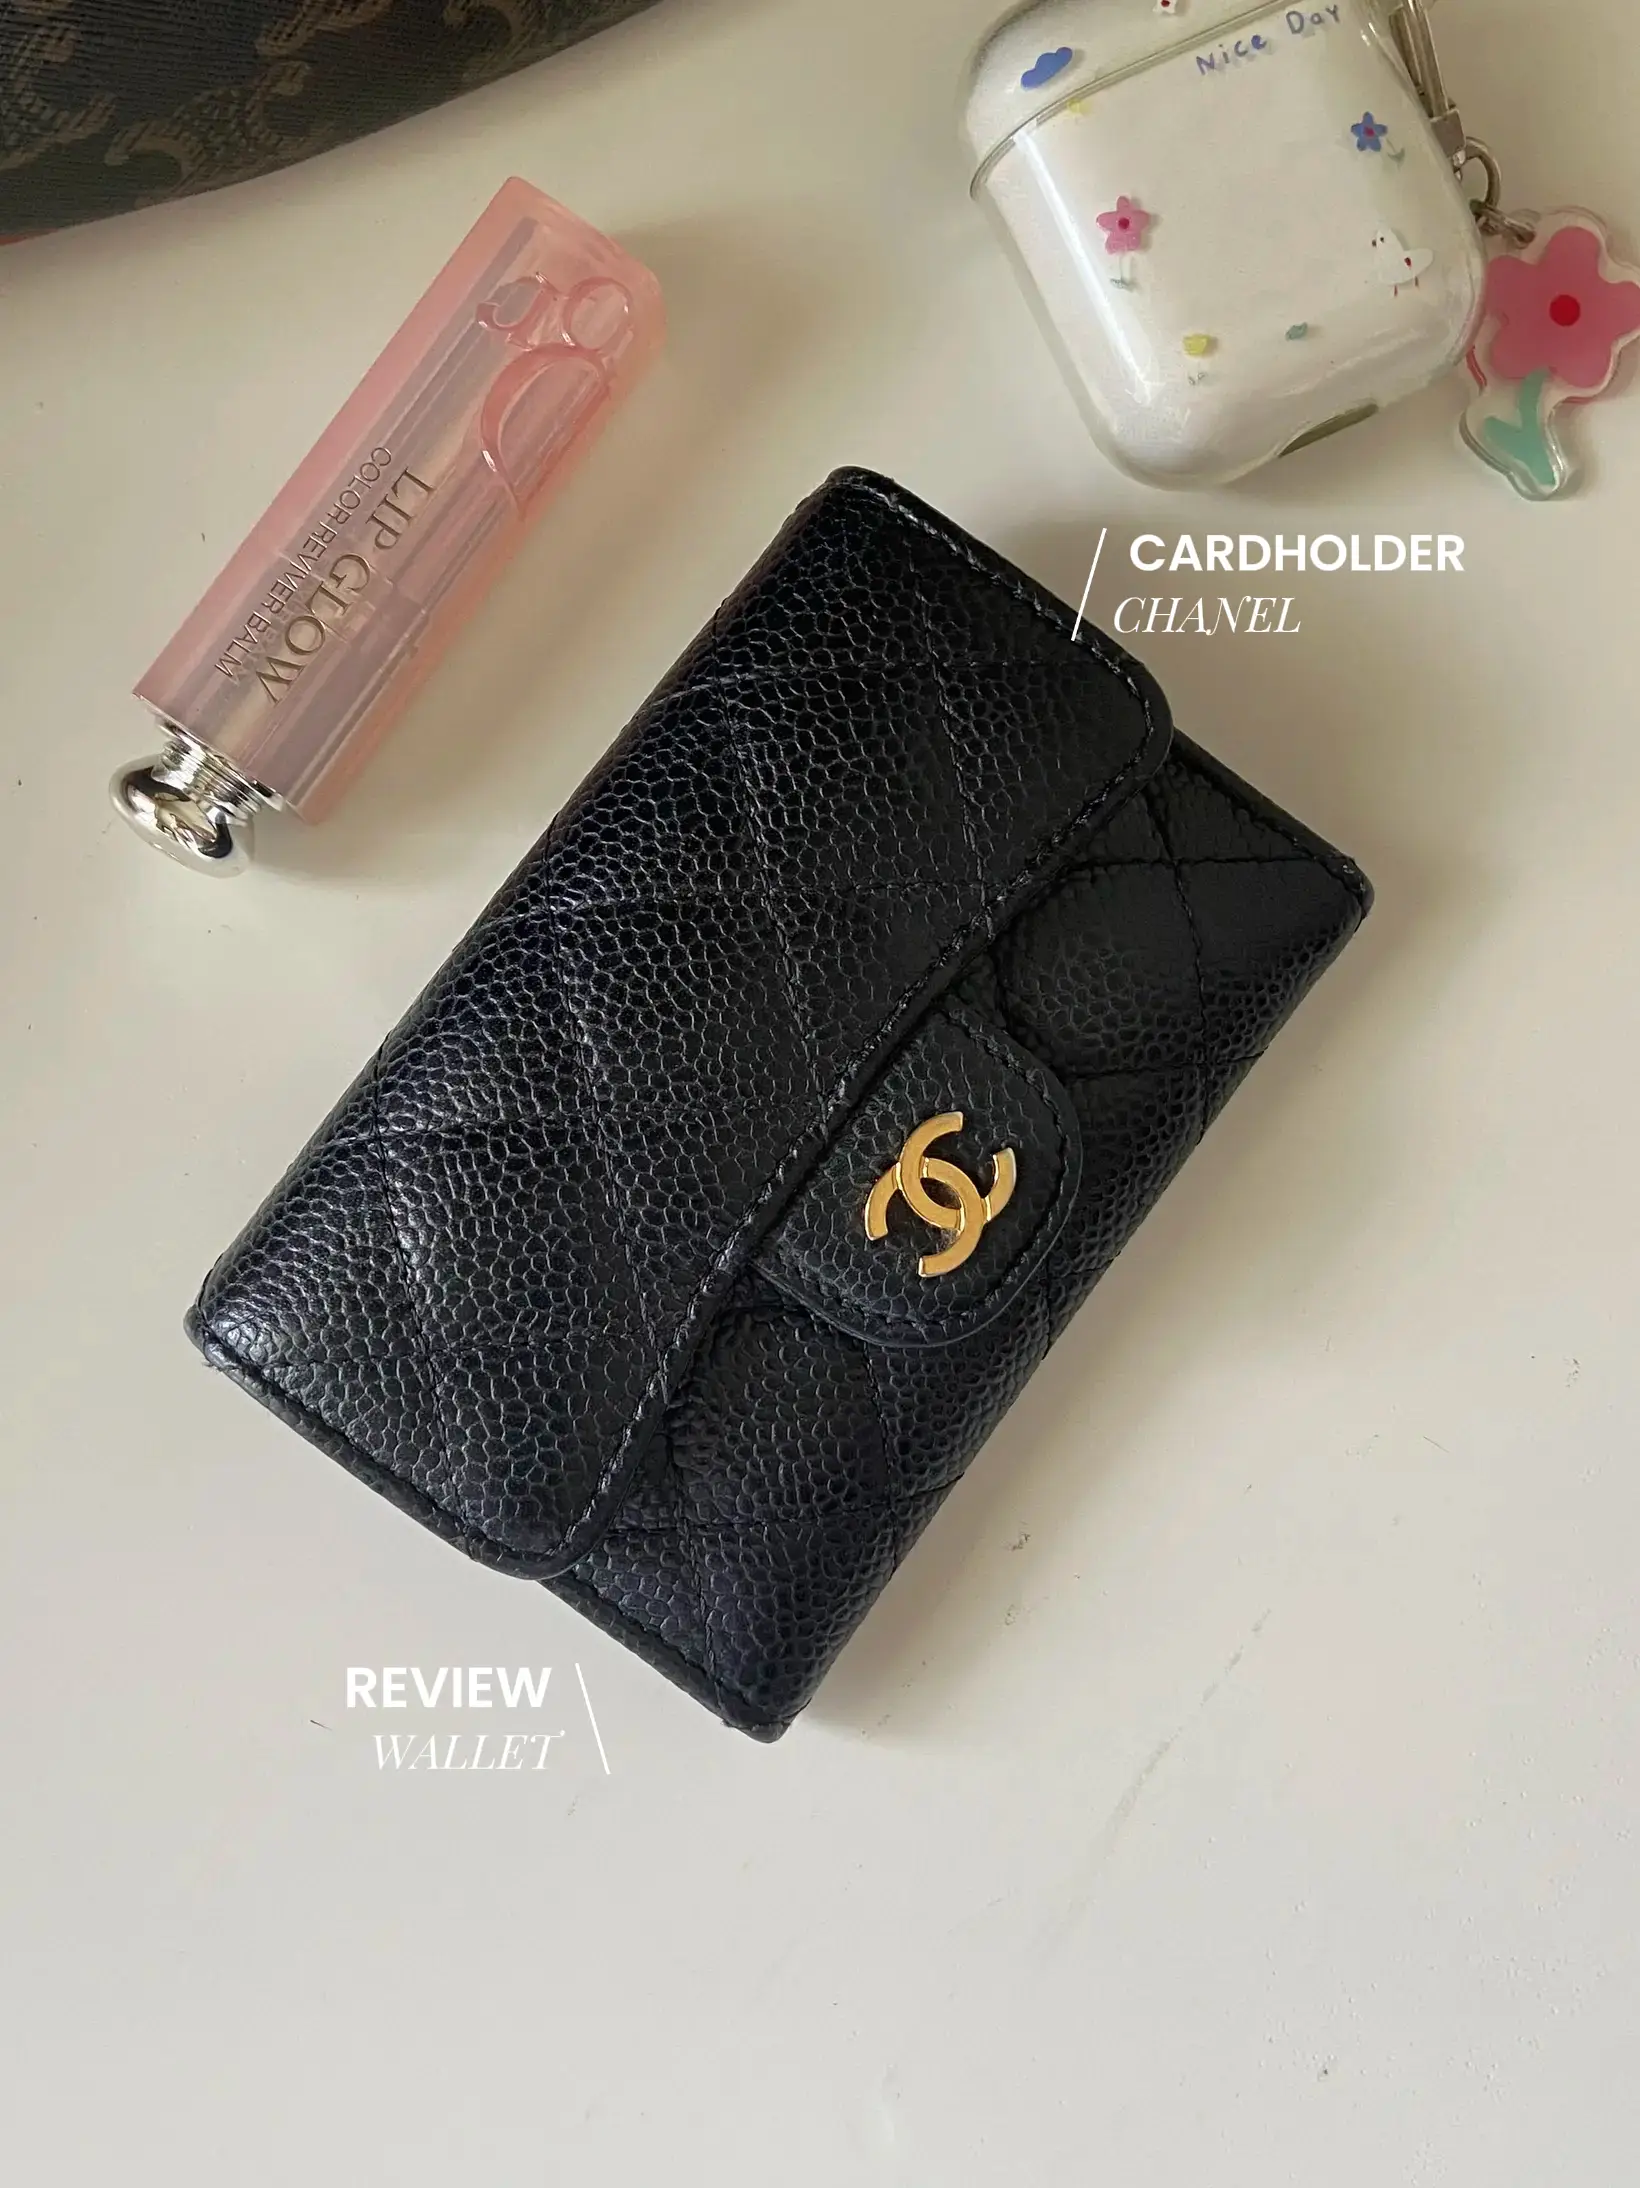 Review cardholder chanel used for 3 years + +